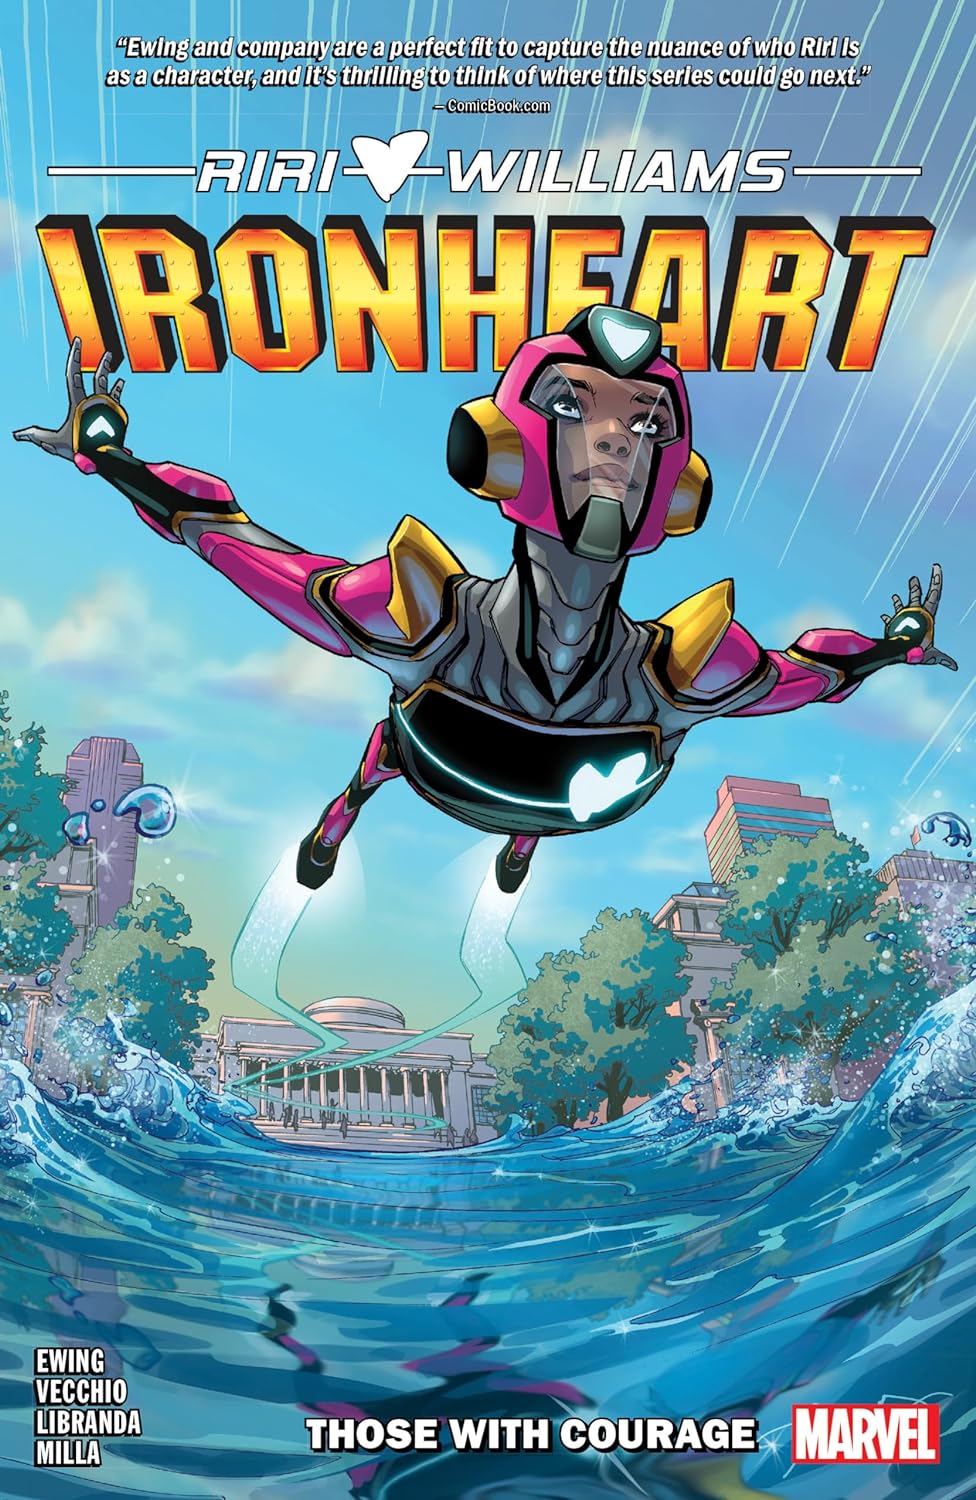 Image for "Ironheart Vol. 1"